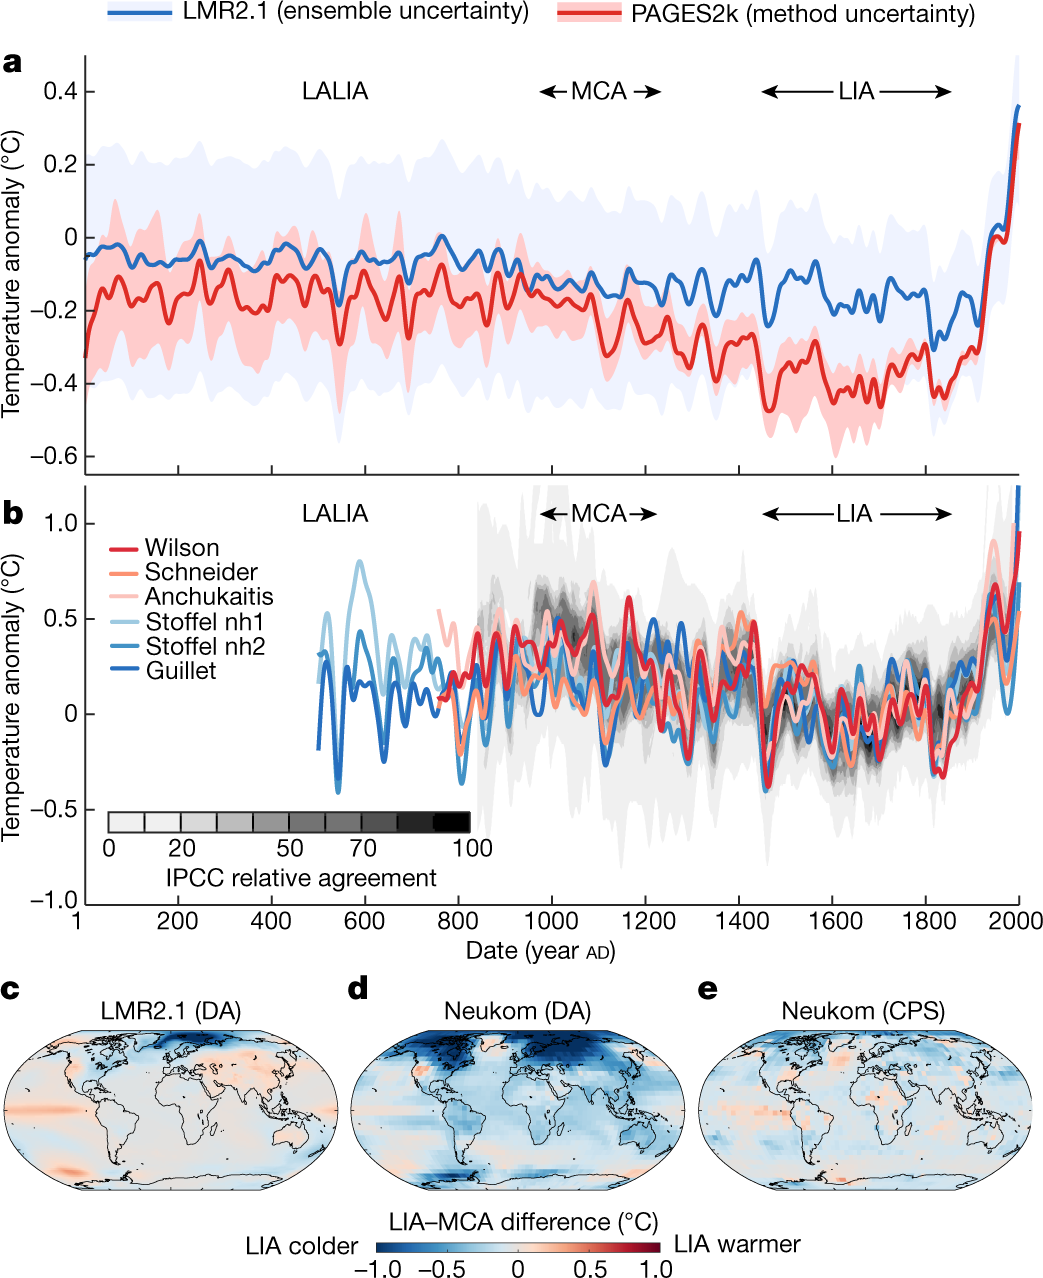 Towards a rigorous understanding of societal responses to climate change |  Nature